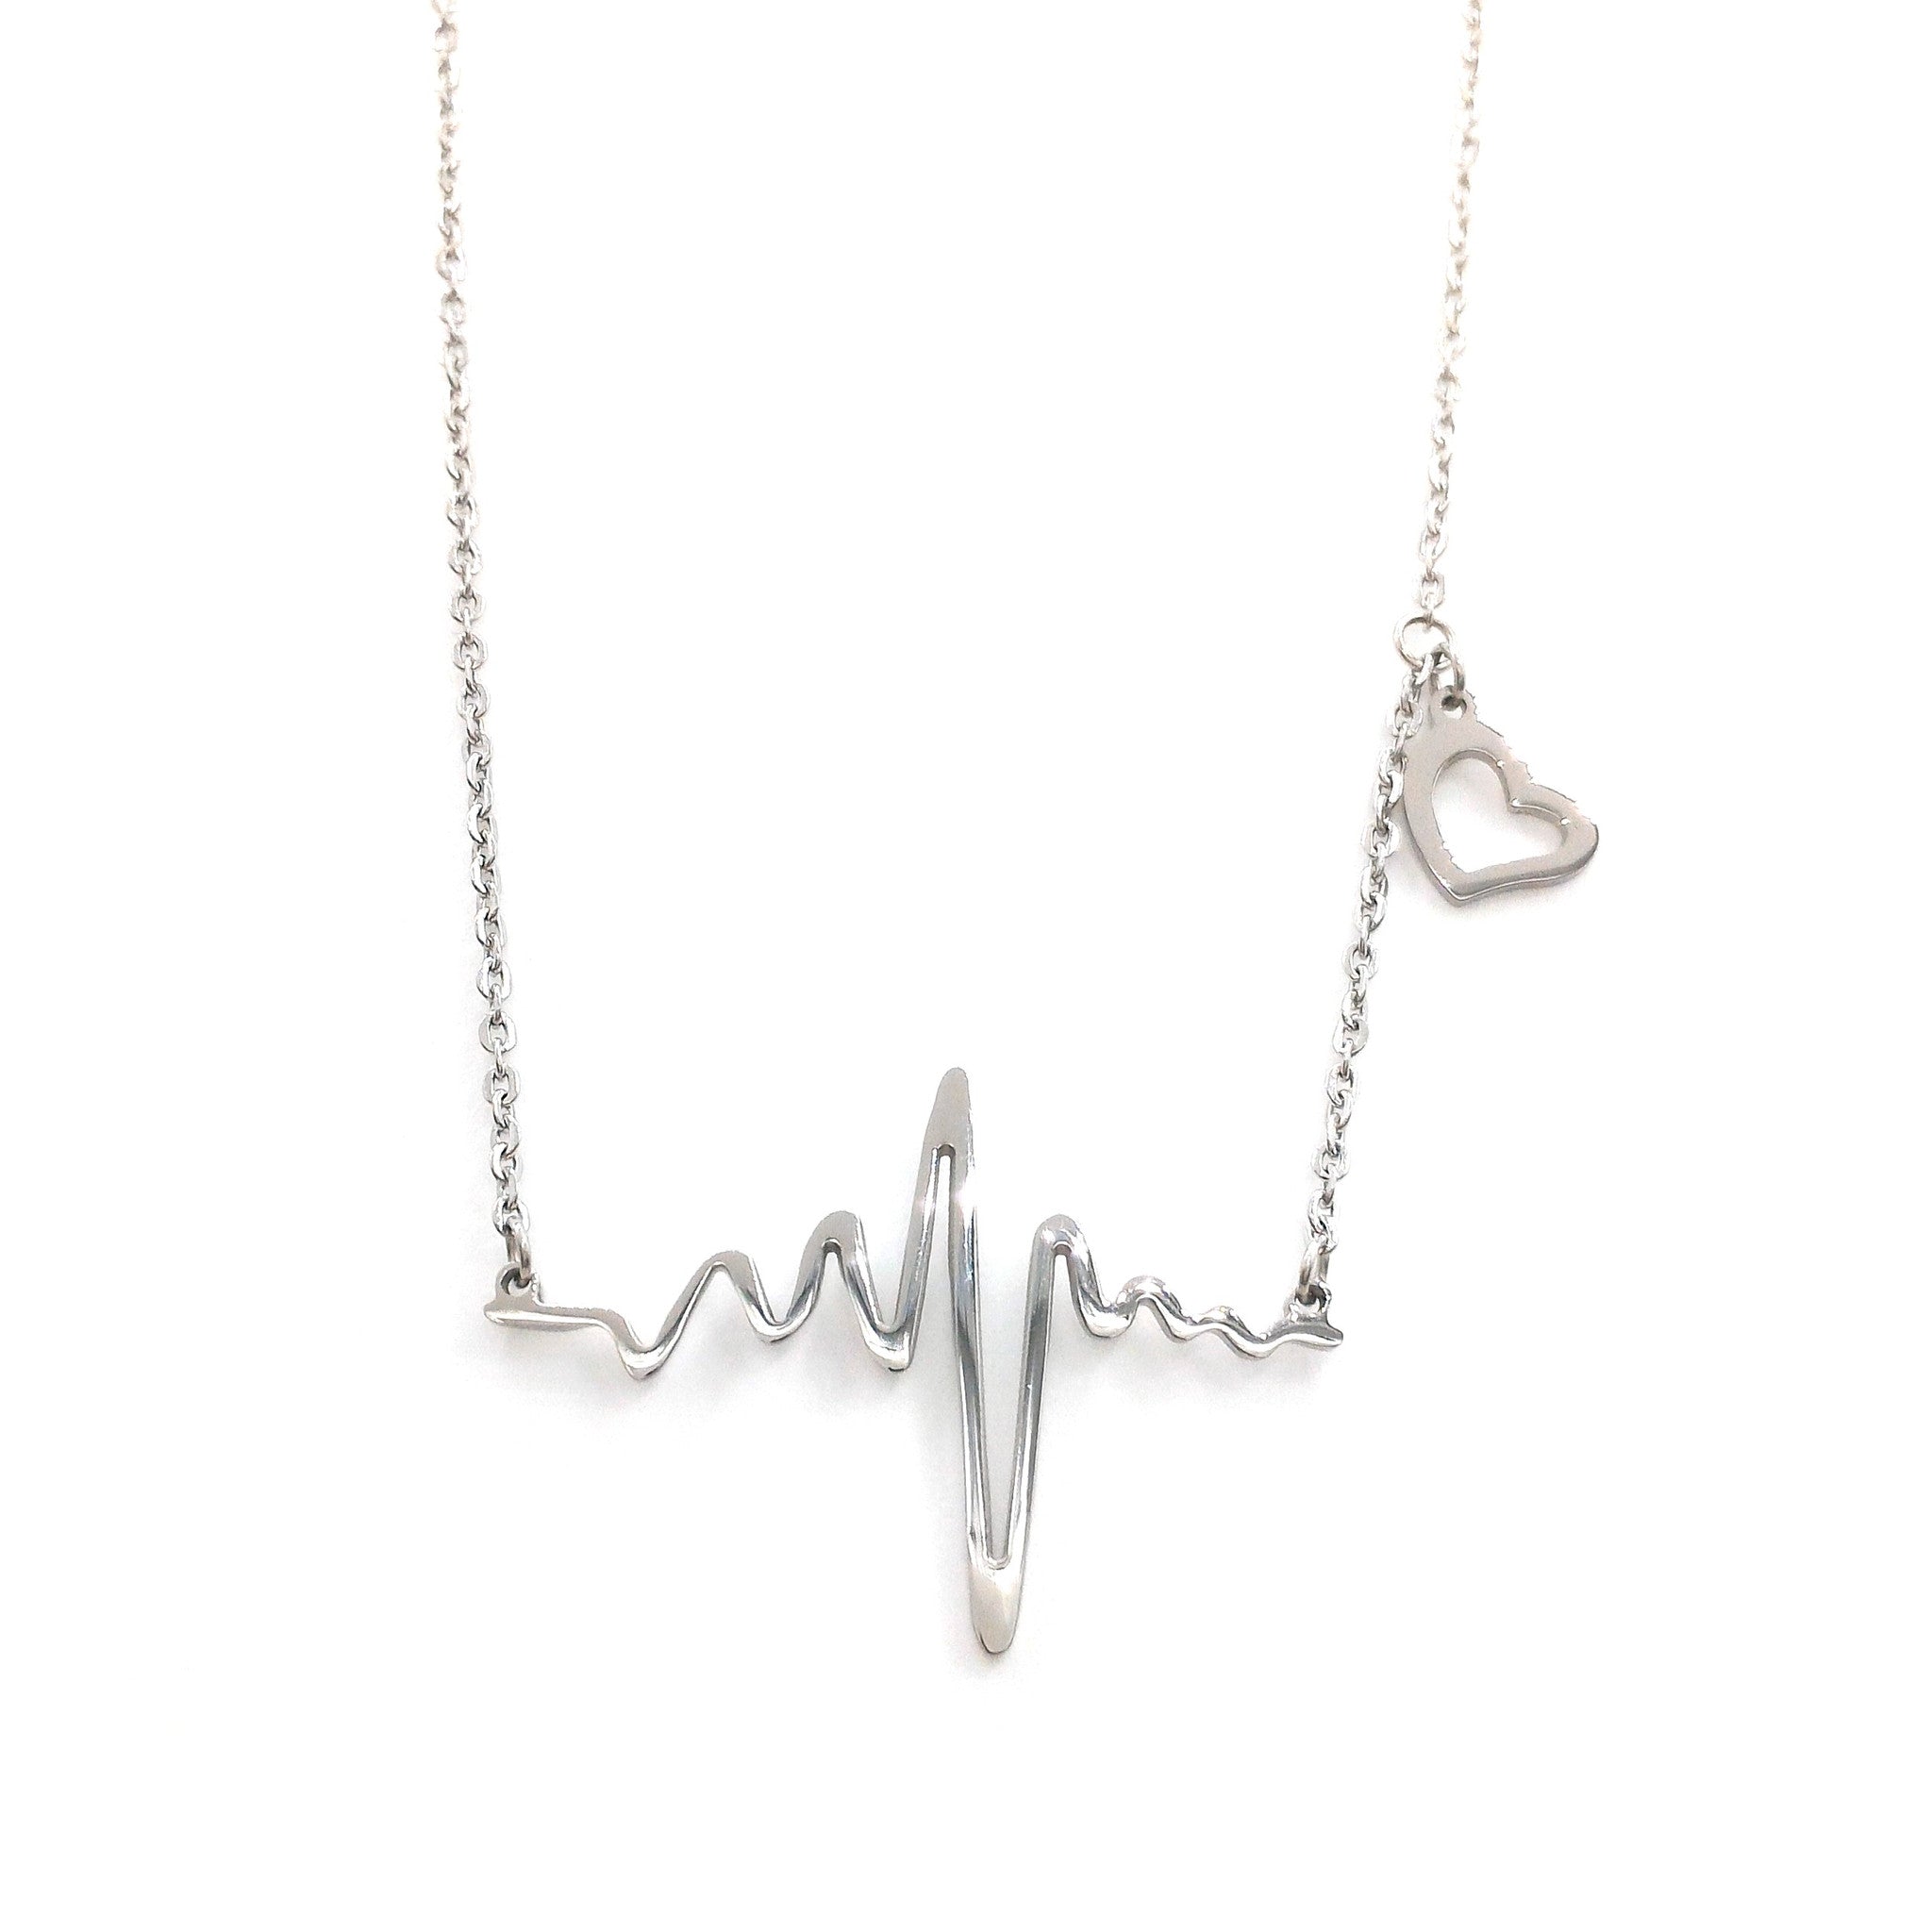 Stainless Steel Heartbeat Necklace